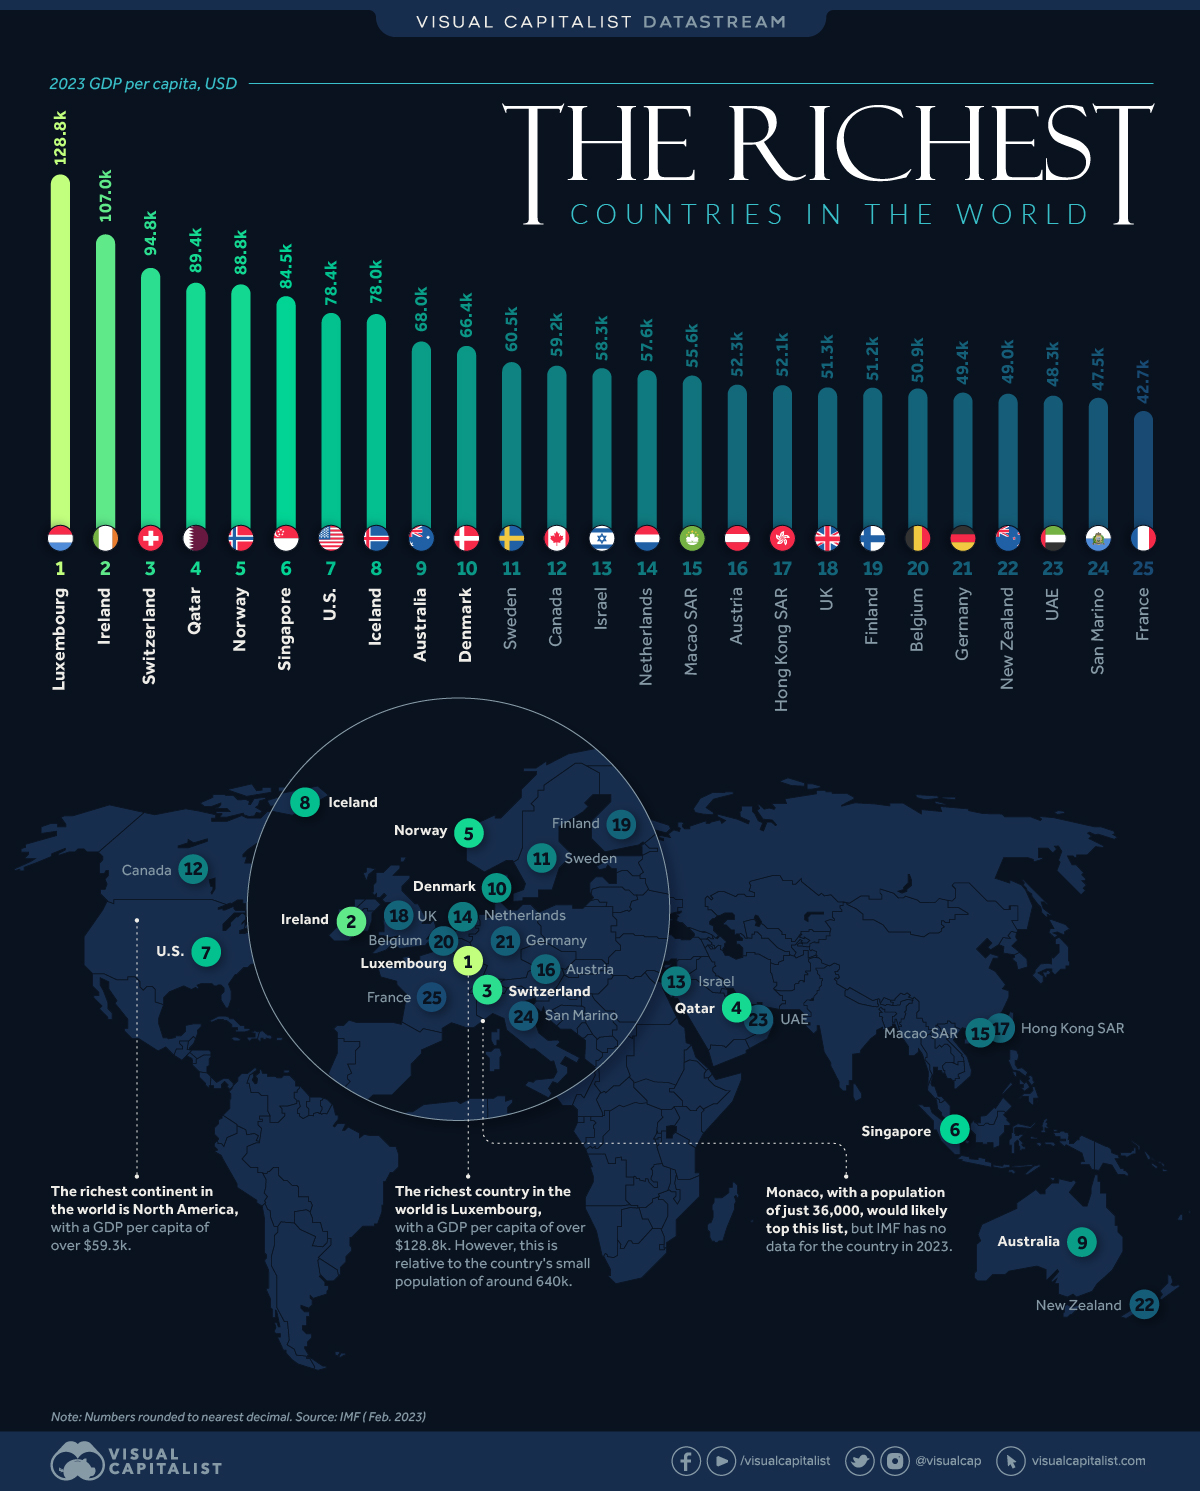 Where is the richest country?